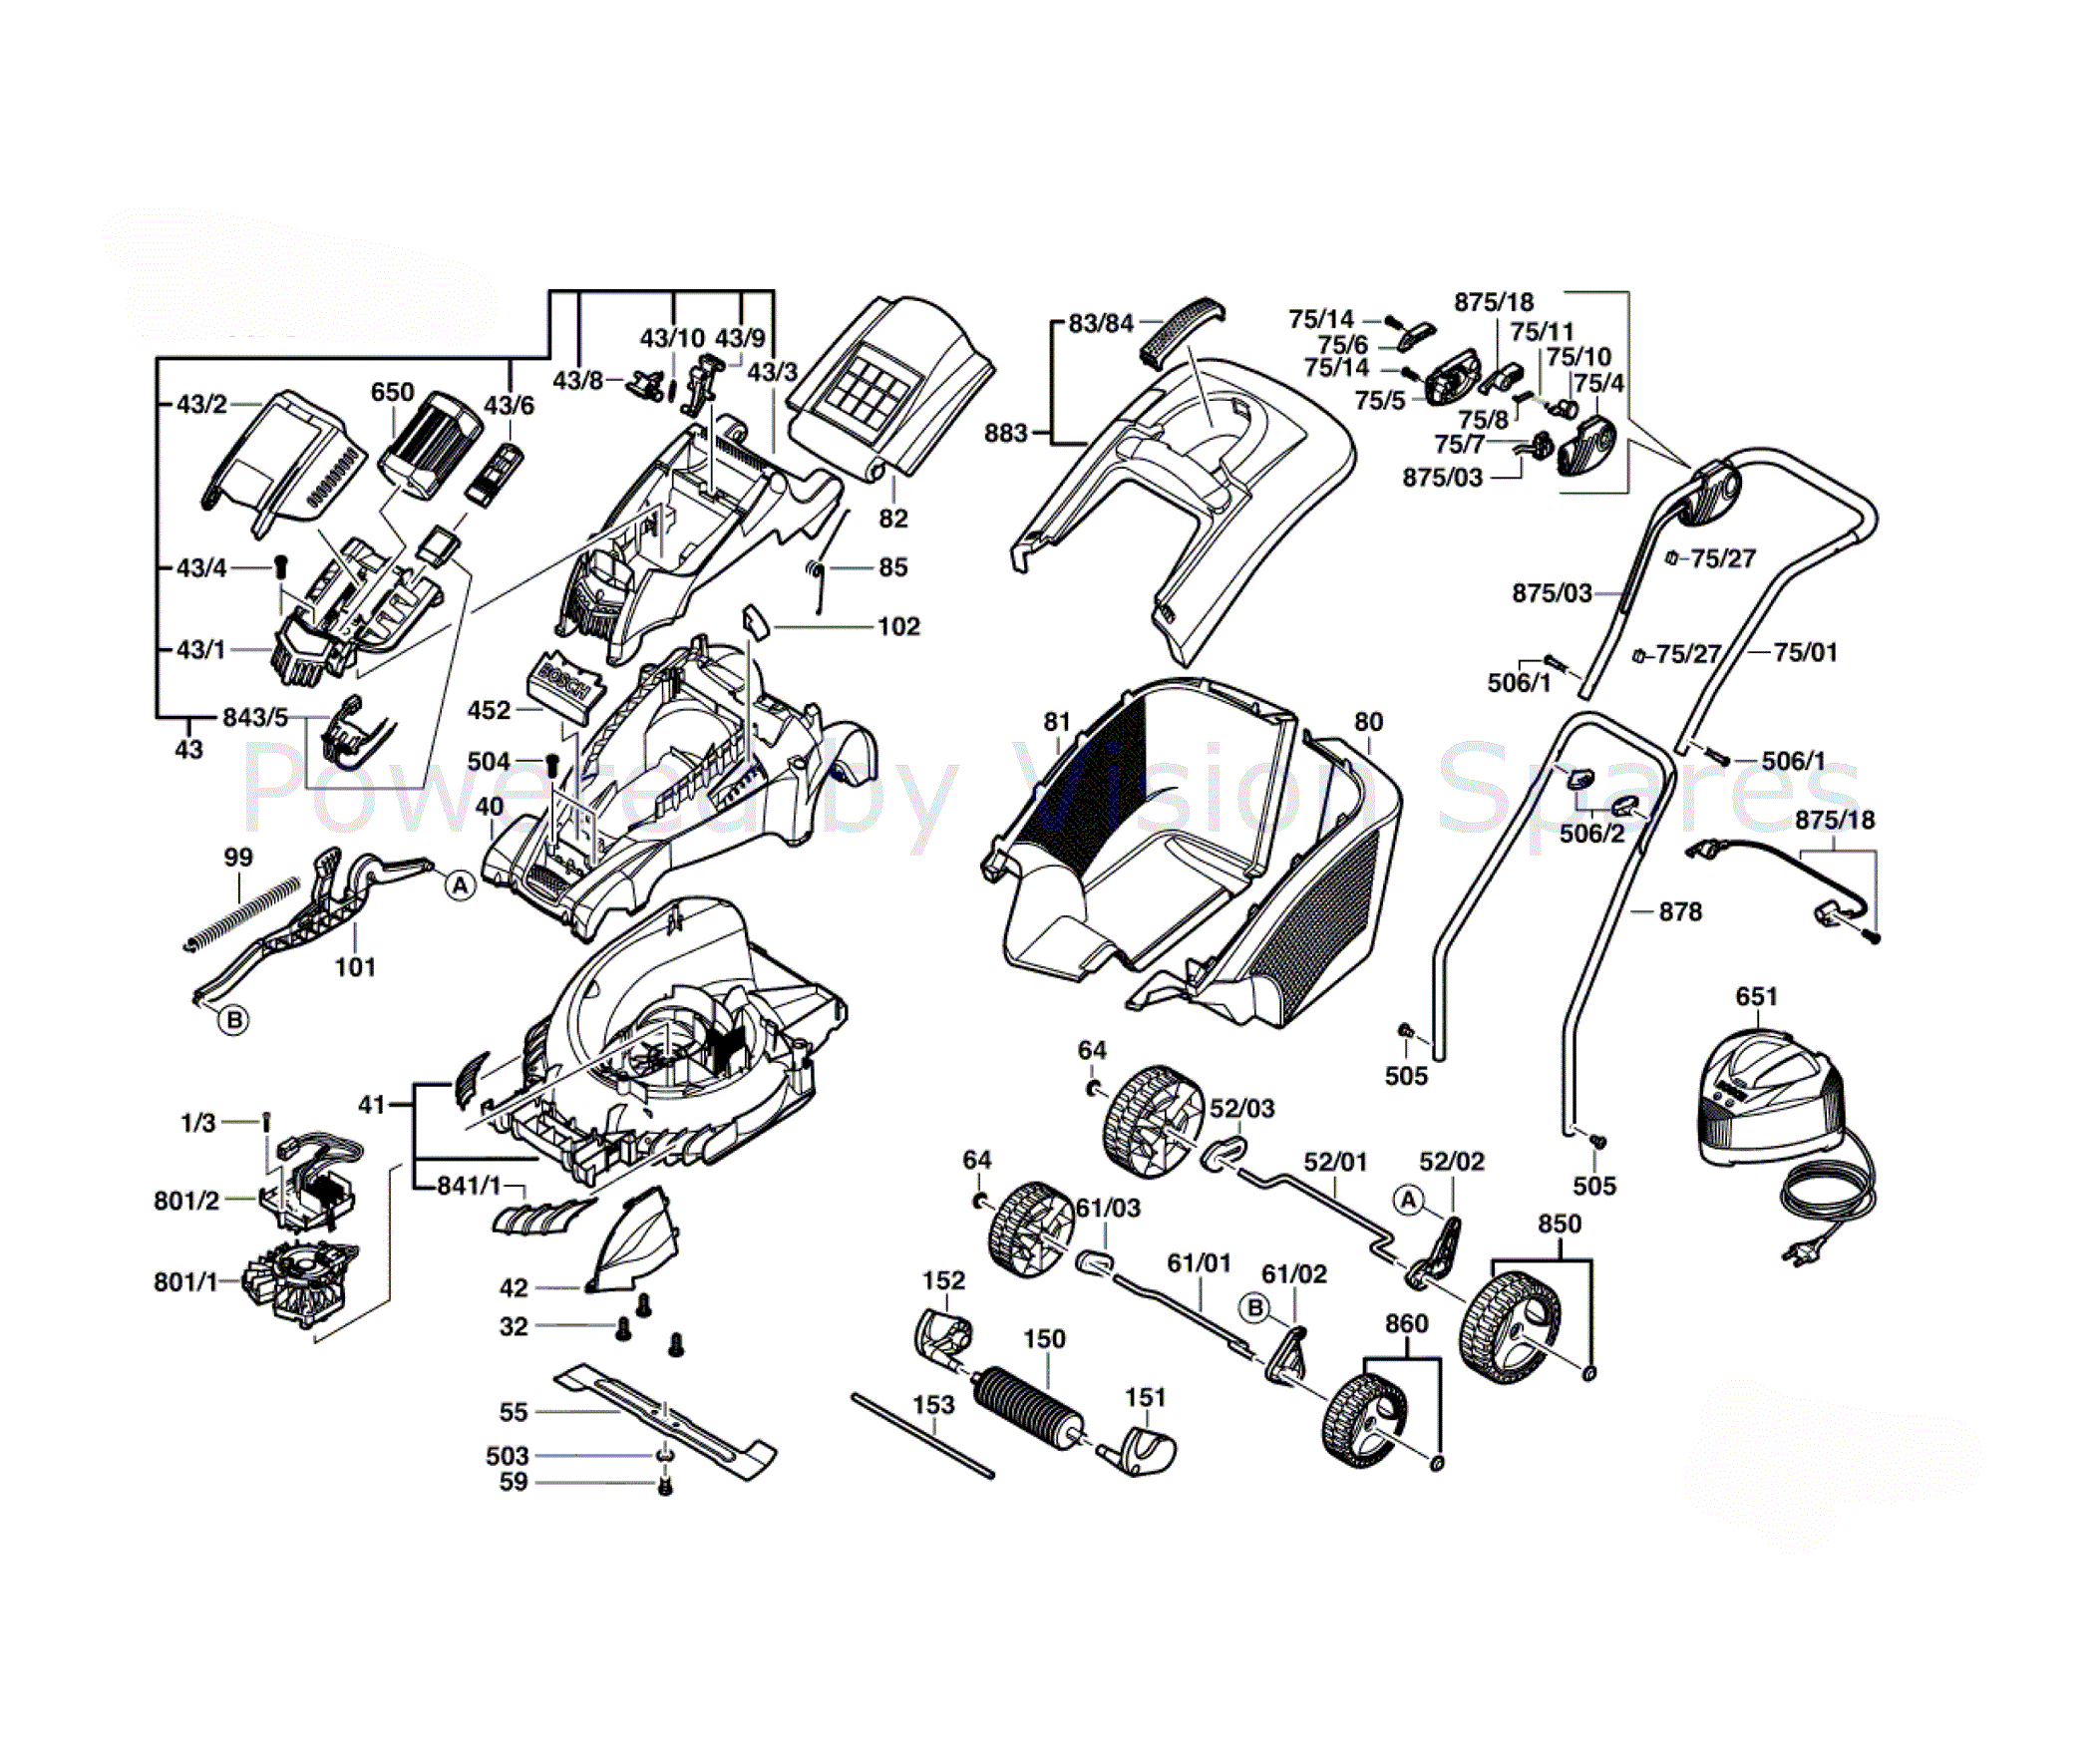 dannelse Cornwall tæmme The following parts are available to buy for your Bosch Rotak 43Li Bosch  Electric Rotary Mowers